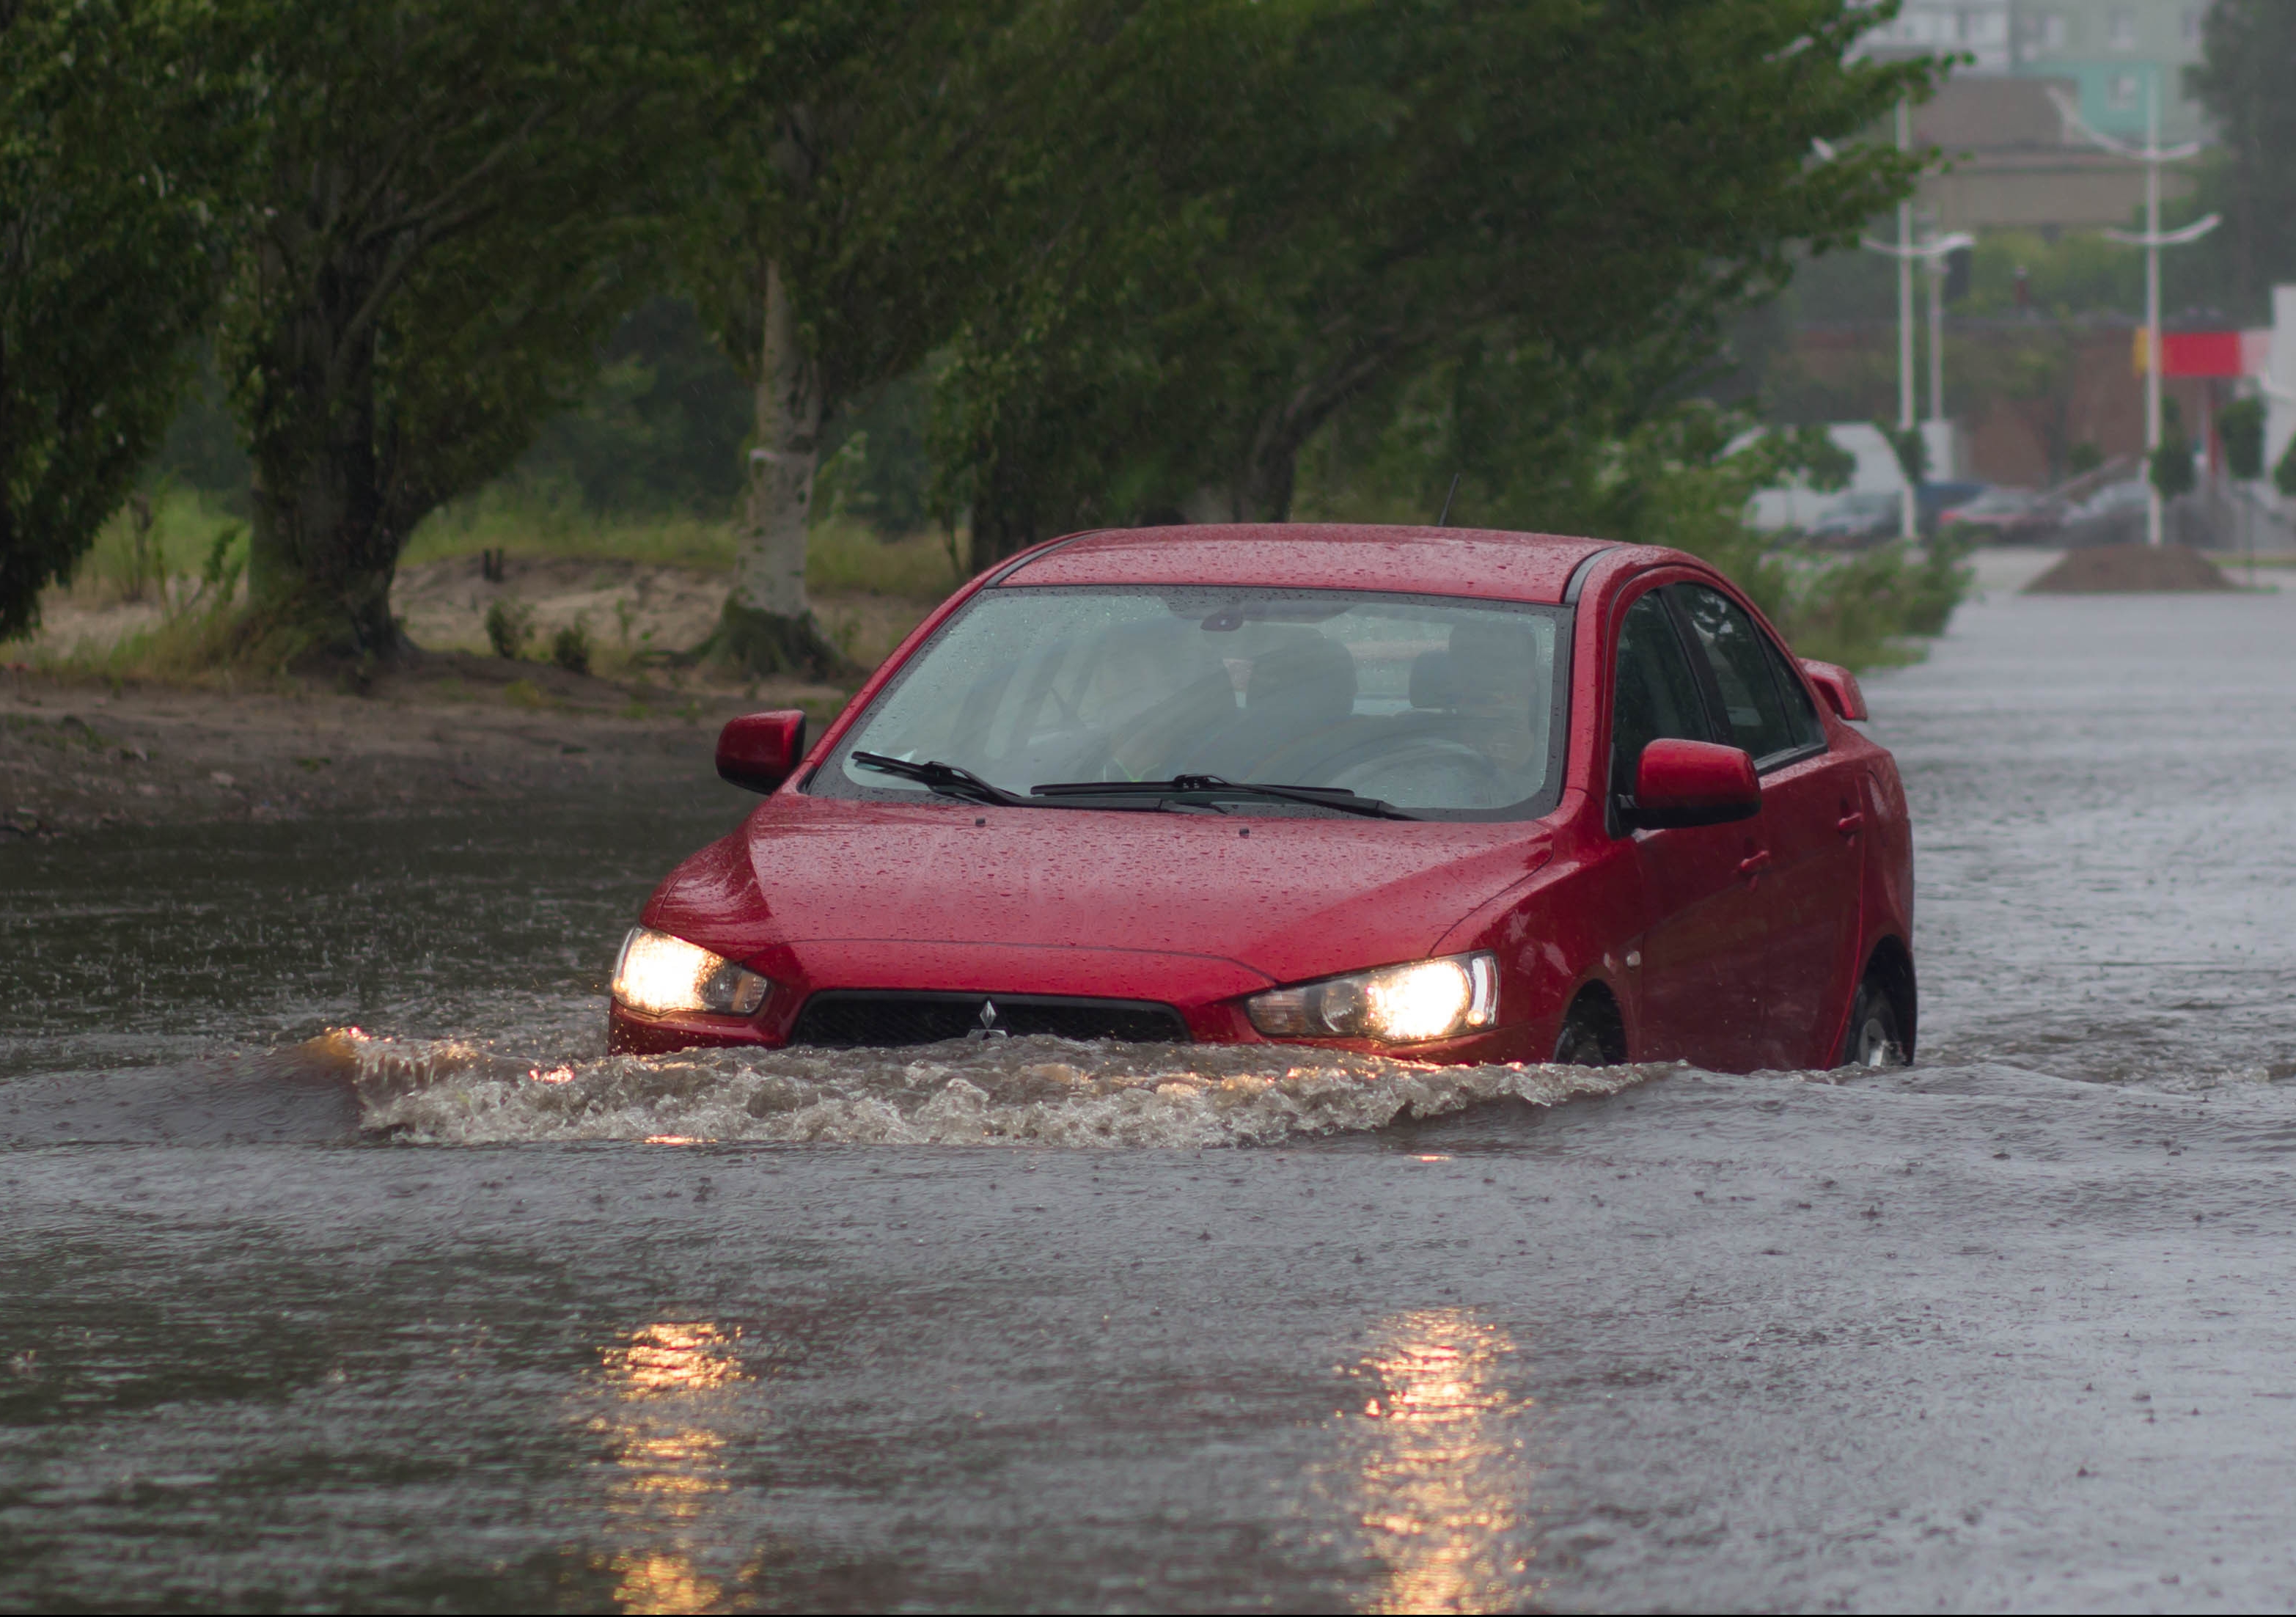 What was surprising was just how little water it took to make even a large vehicle unstable. Photo: Shutterstock